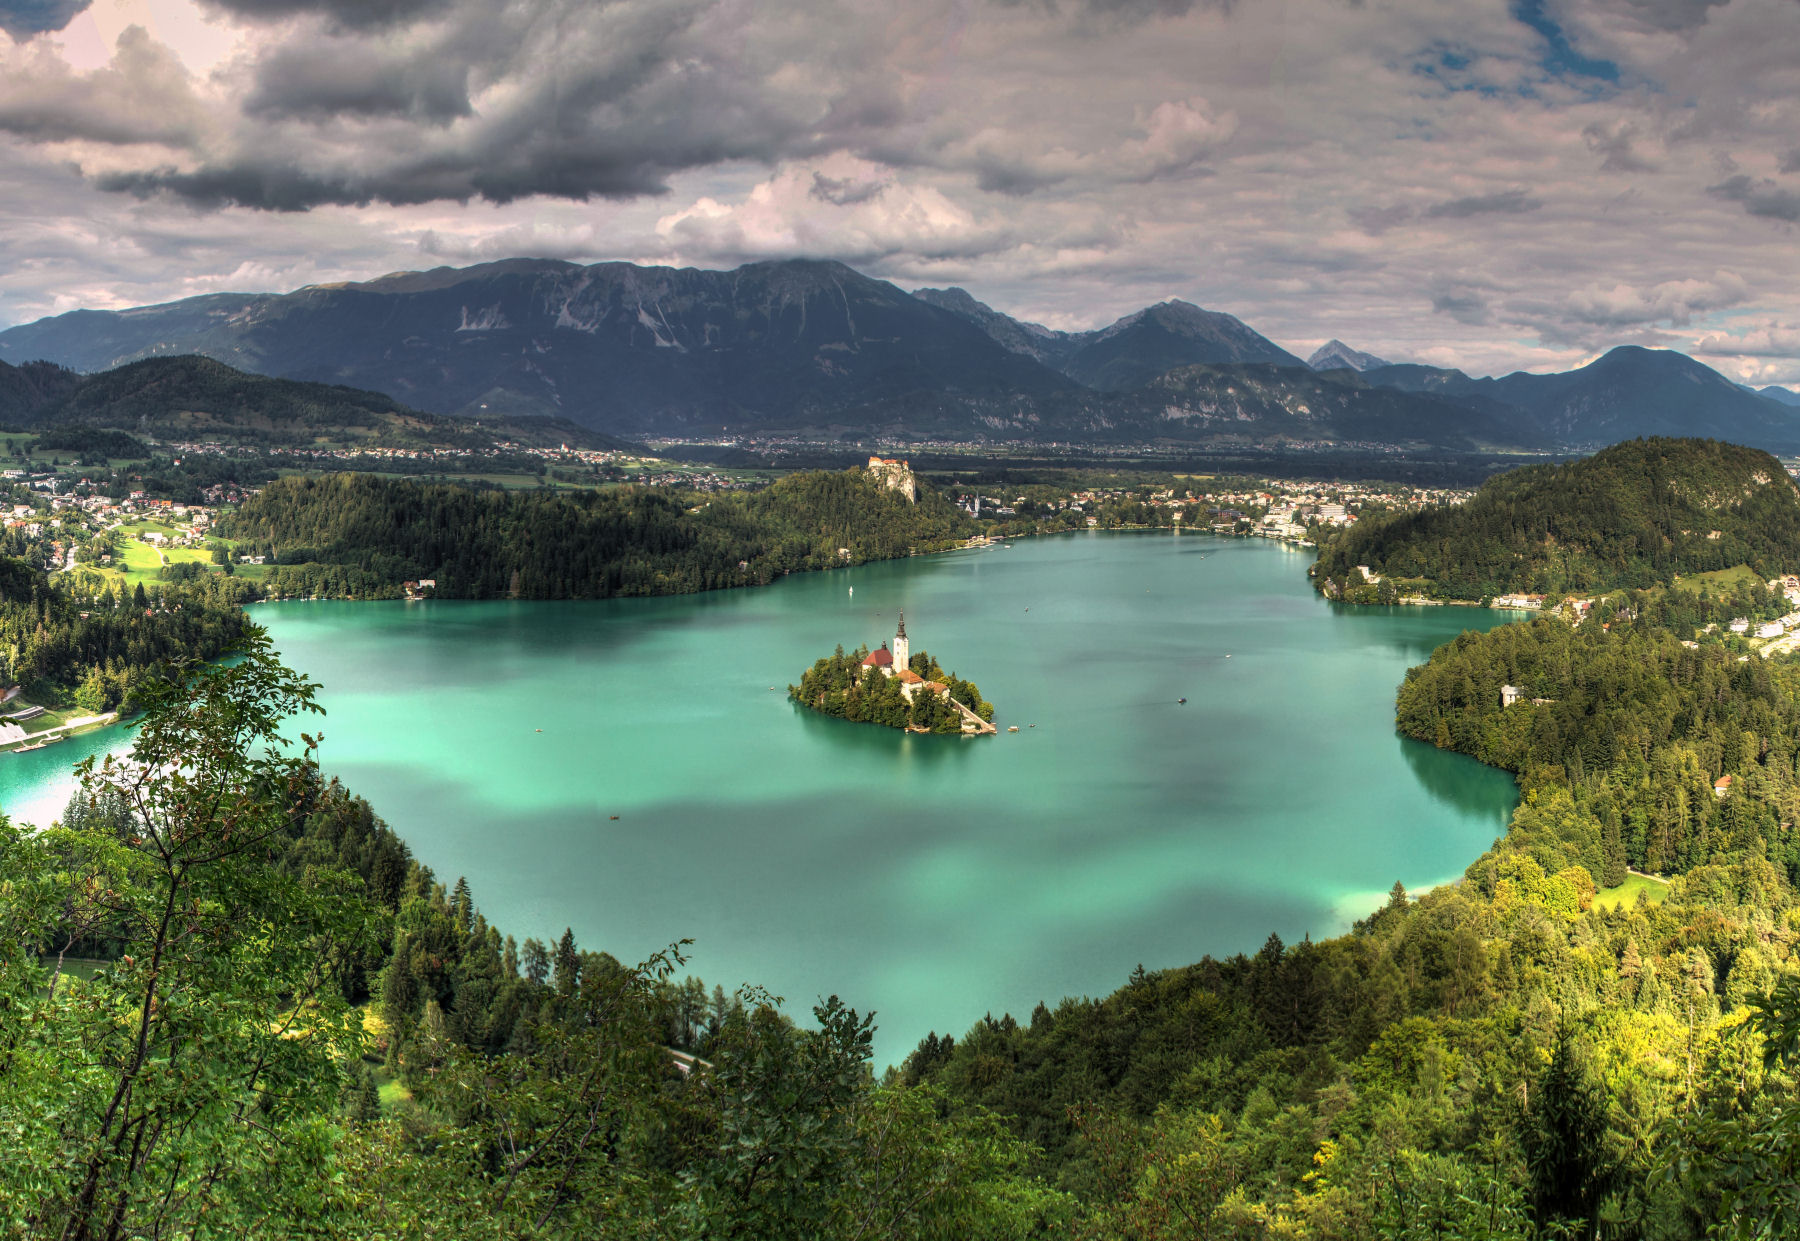 30 Beautiful Lake Bled Photos To Inspire You To Visit Slovenia